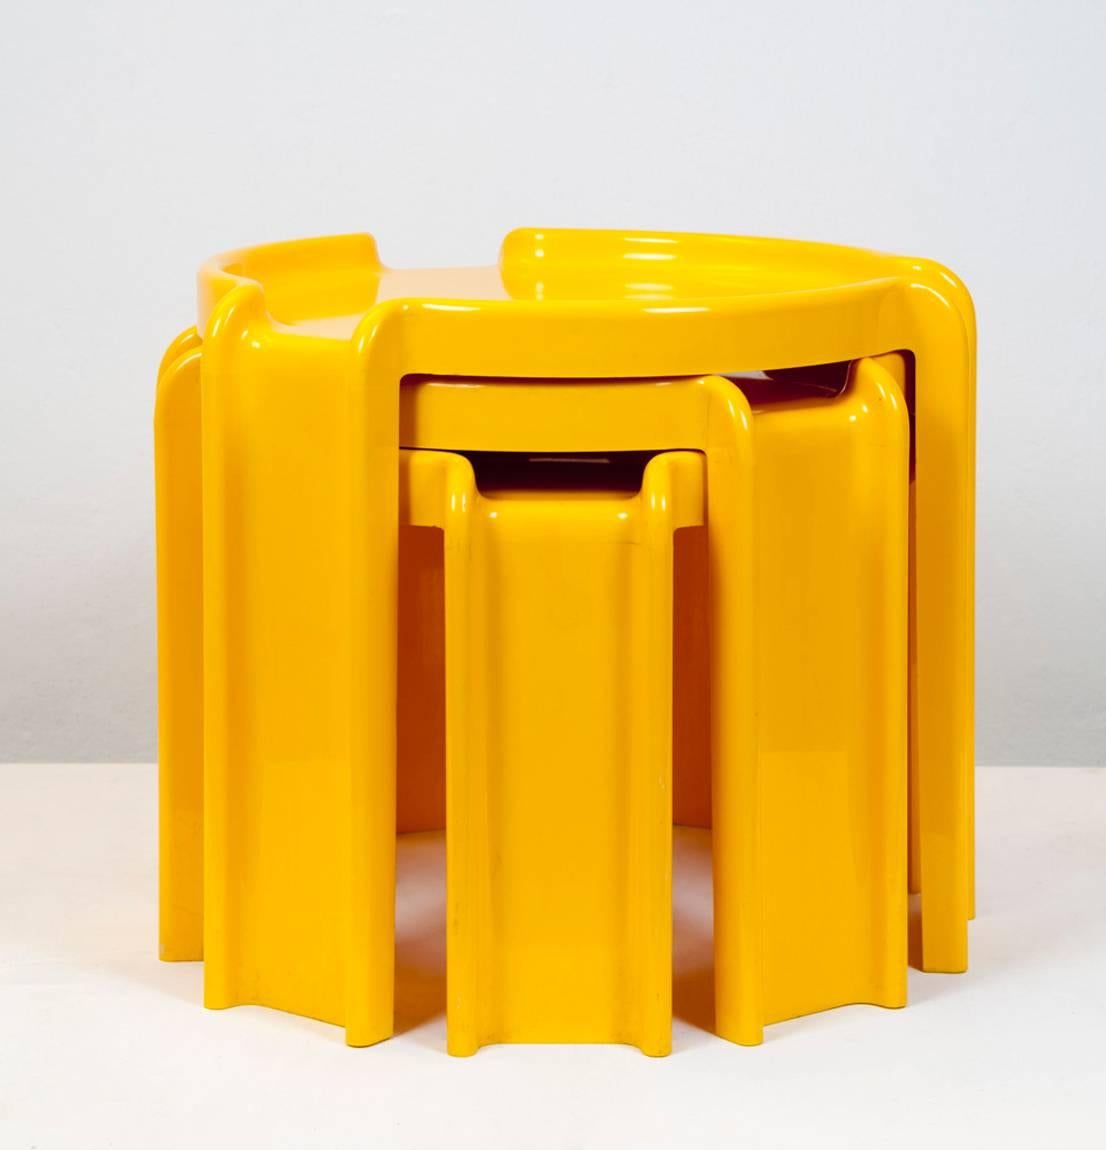 Set of nesting tables.
Design by Giotto Stoppino (1968).
Manufactured by Beylerian/Kartell, USA.
Yellow plastic.
D 42.5 cm / H max. 41.0 cm.